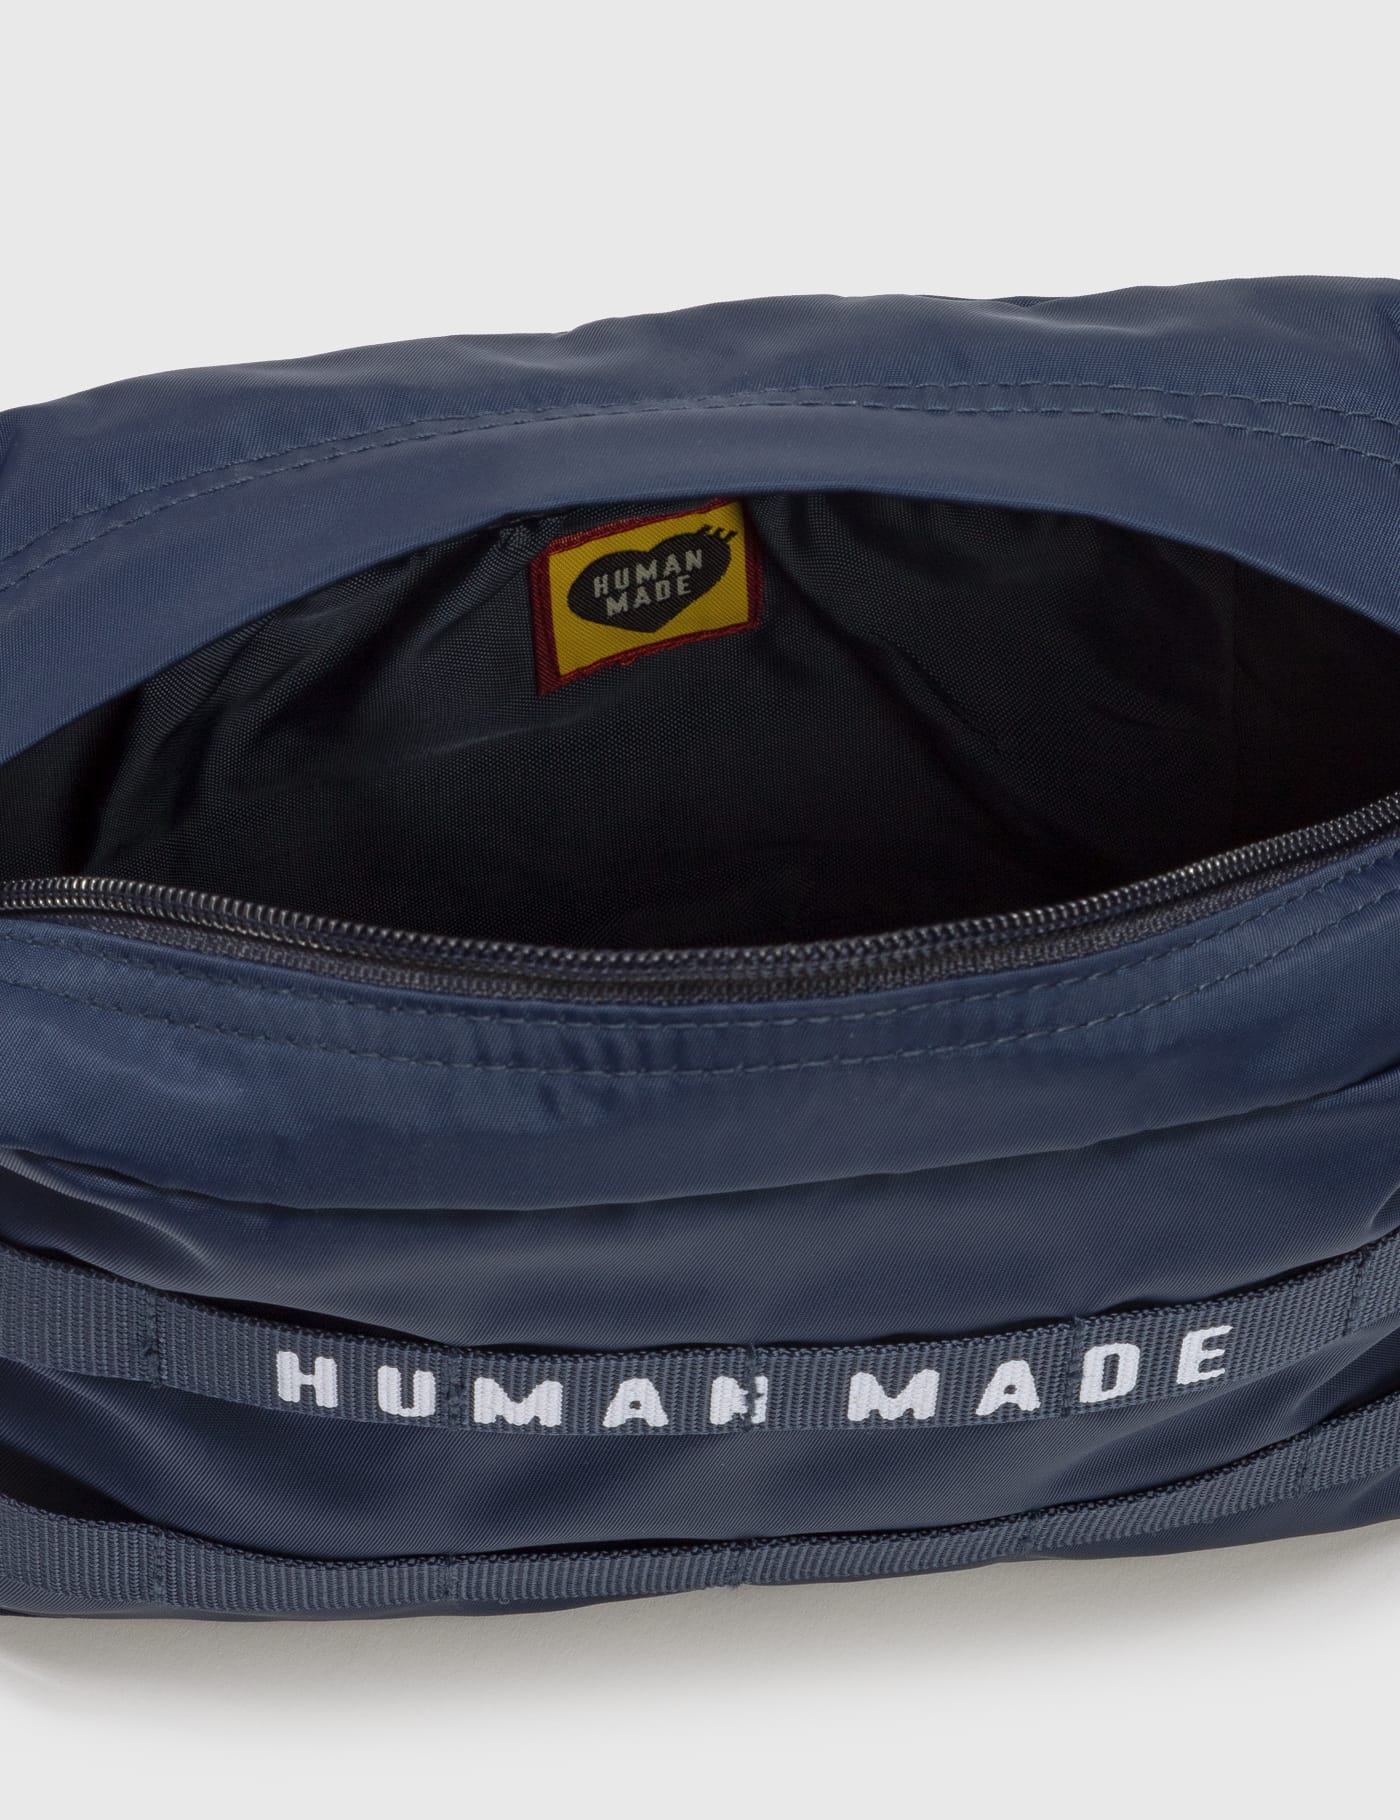 Human Made - Military Pouch #1 | HBX - Globally Curated Fashion